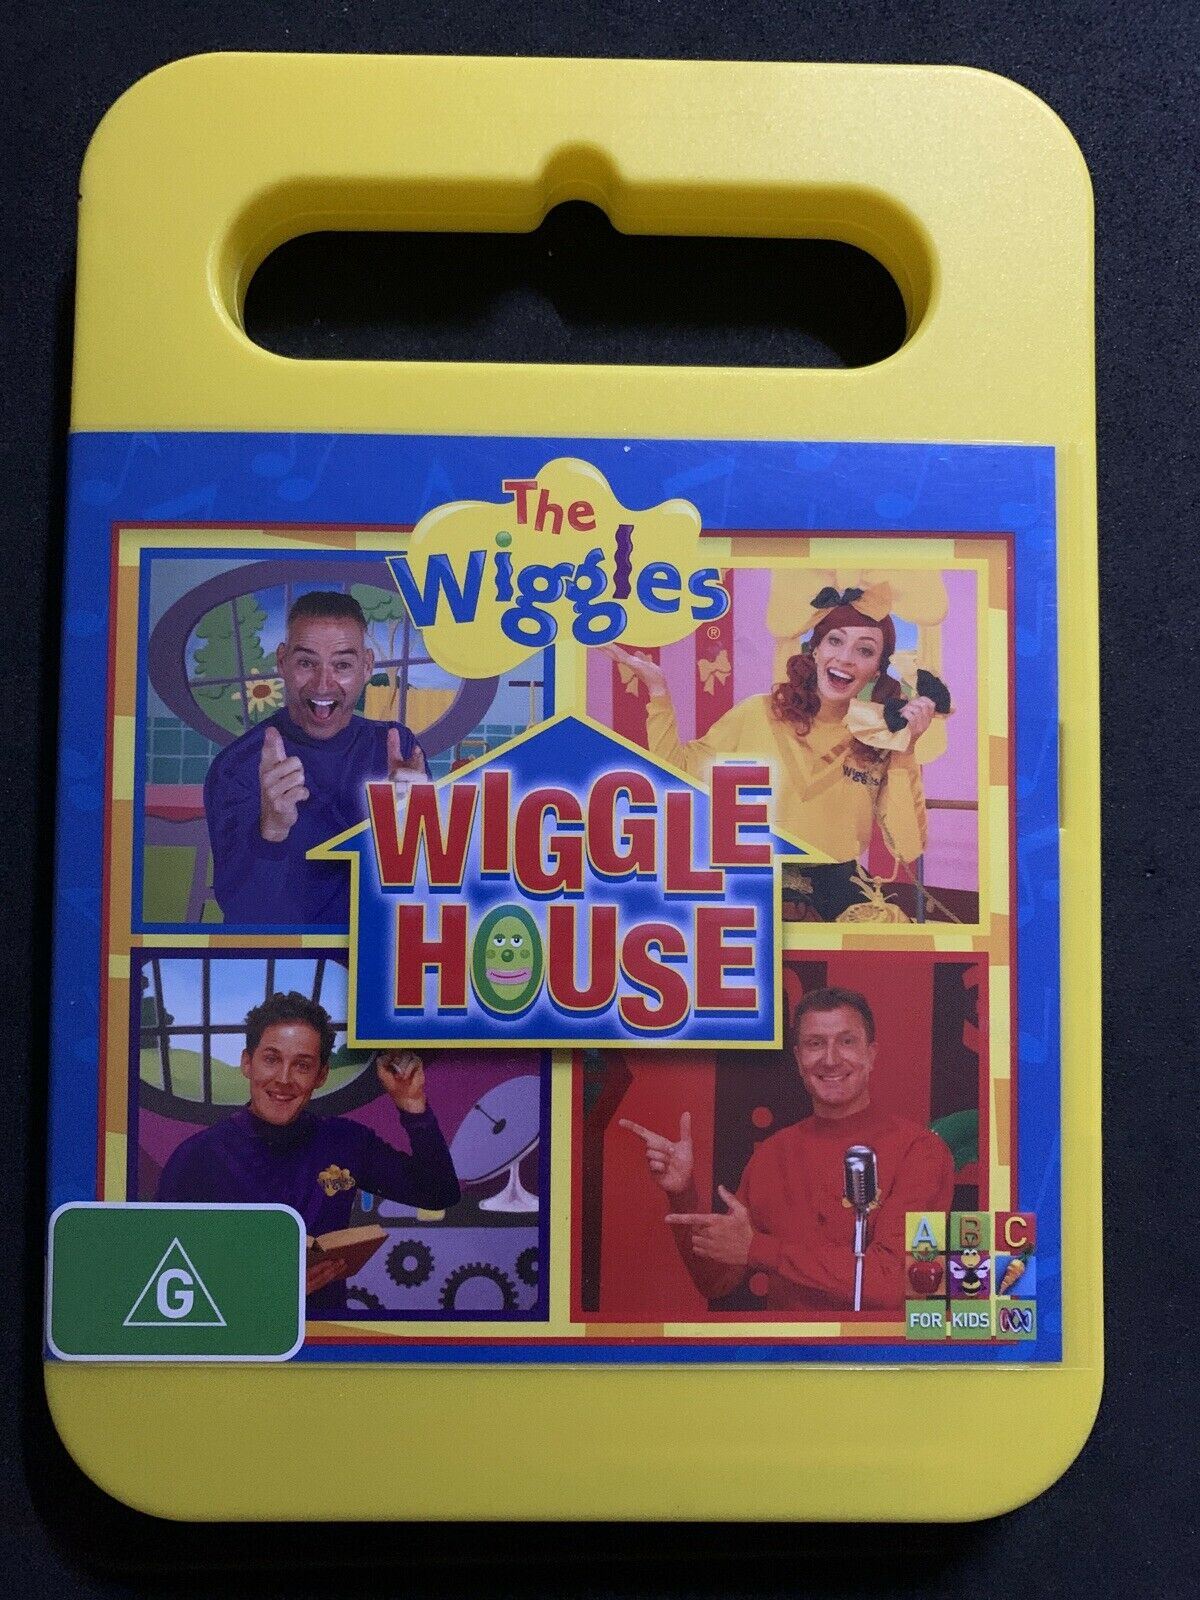 The Wiggles - Wiggle House + Apples & Bananas (DVD) Region 4